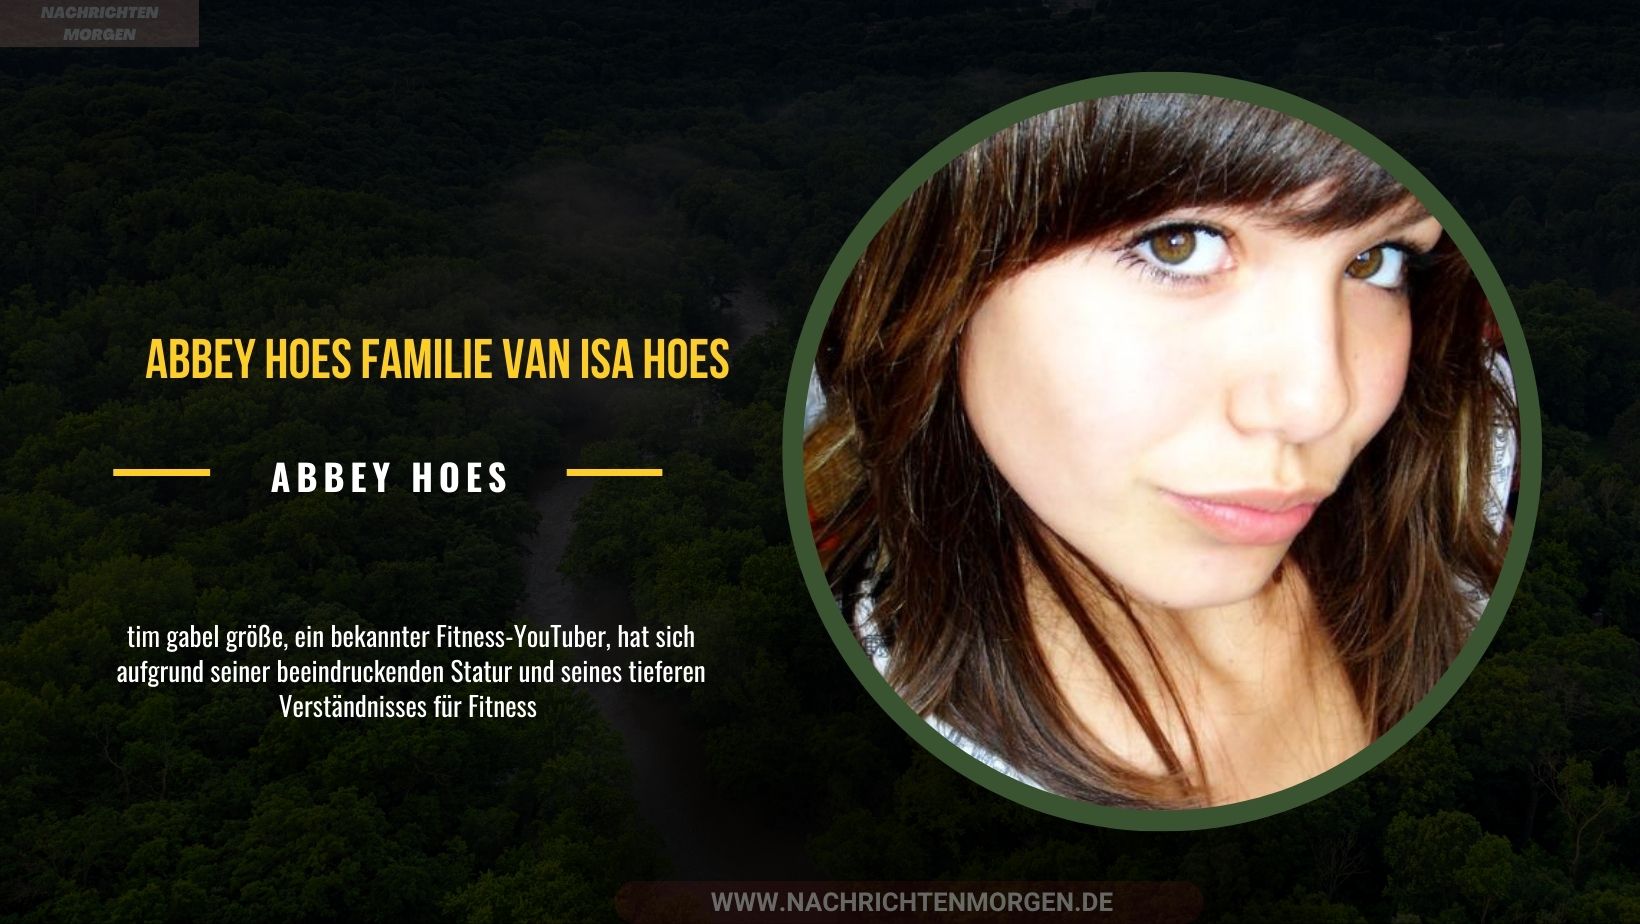 abbey hoes familie van isa hoes